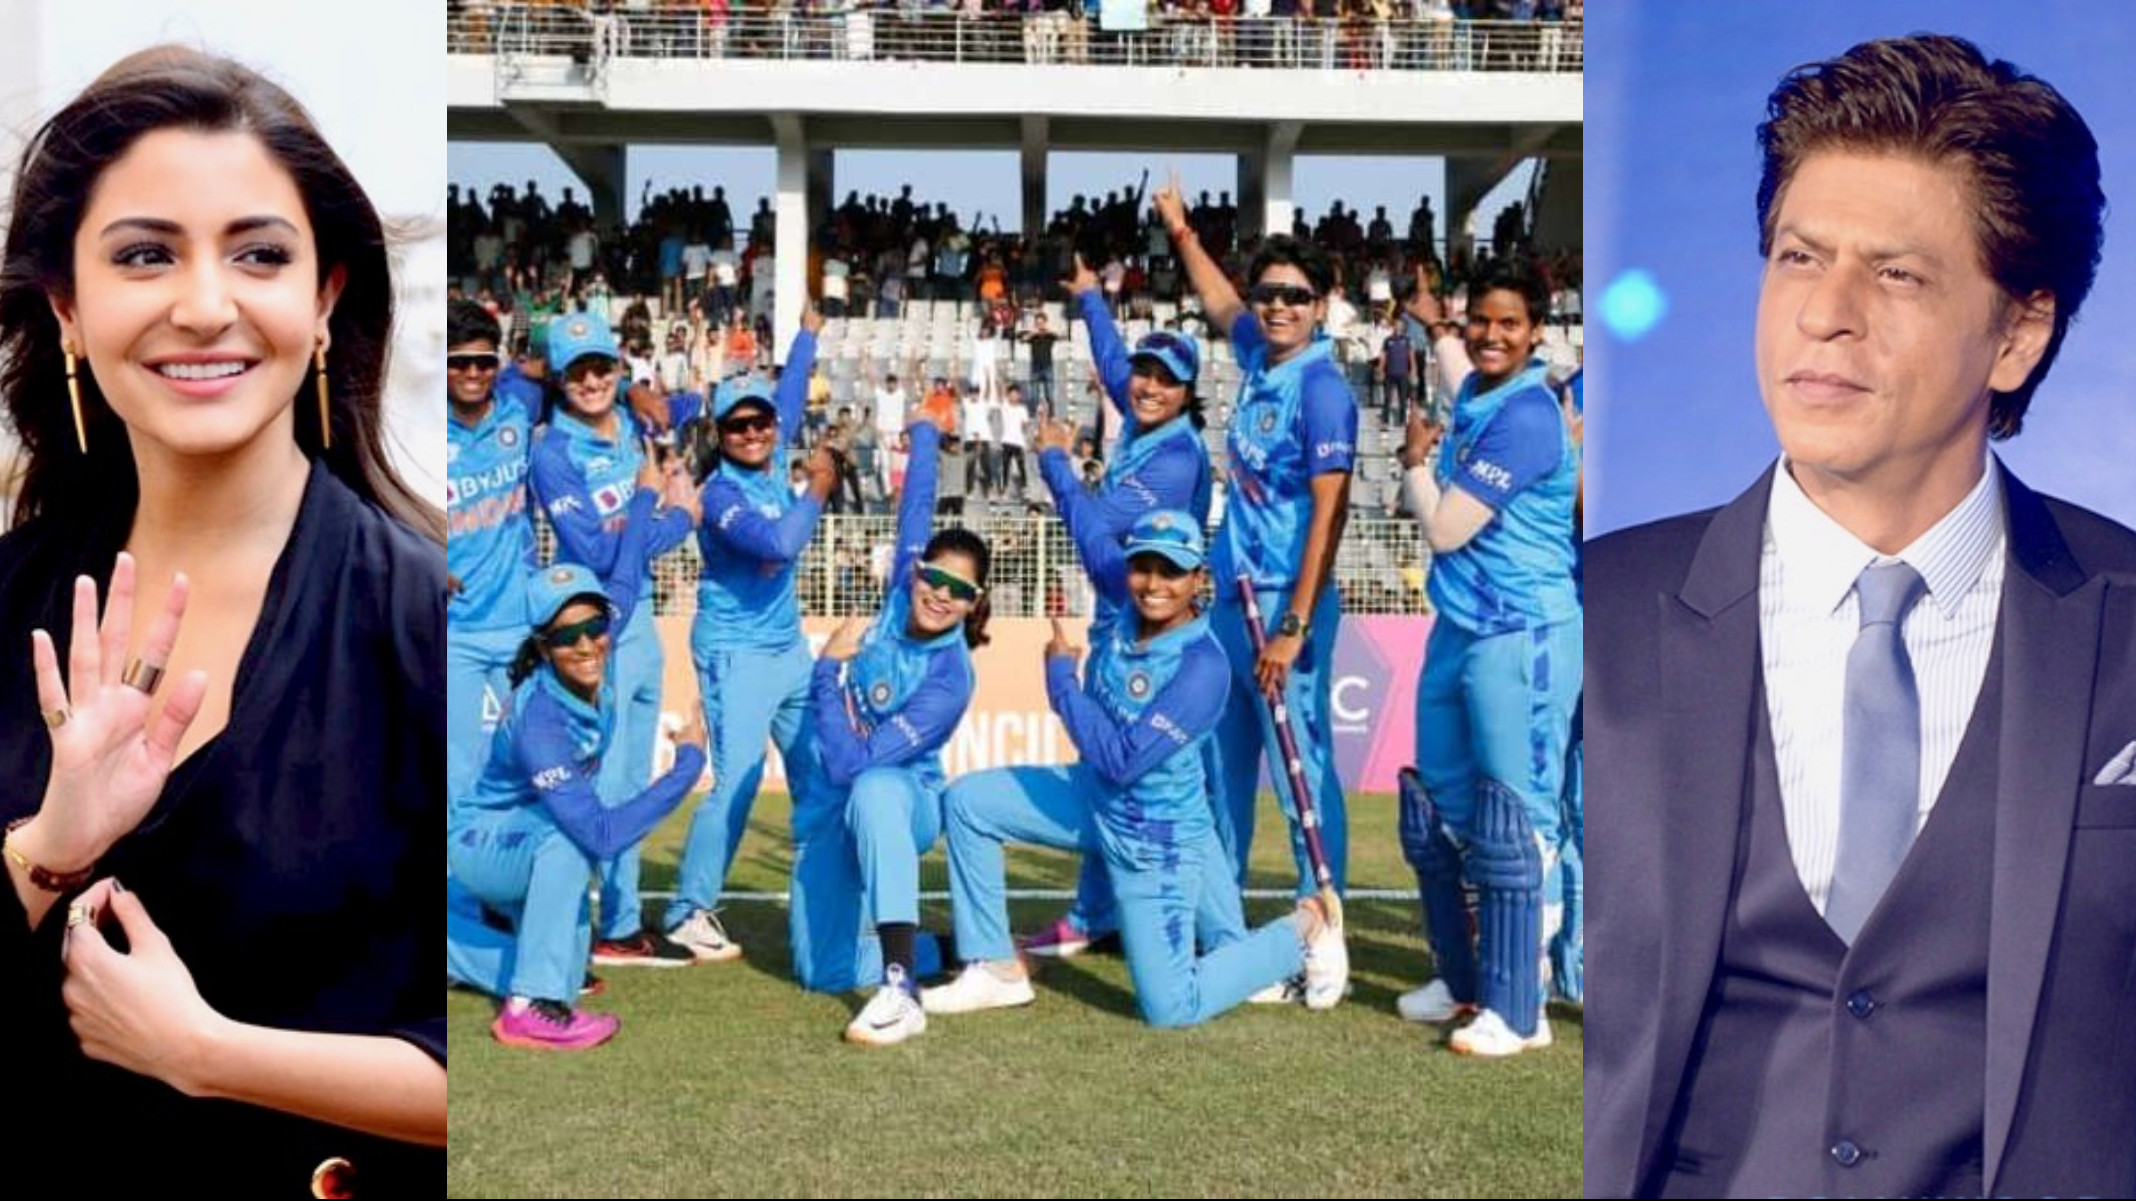 Shah Rukh Khan, Anushka Sharma, and other Bollywood stars react to BCCI’s equal pay announcement